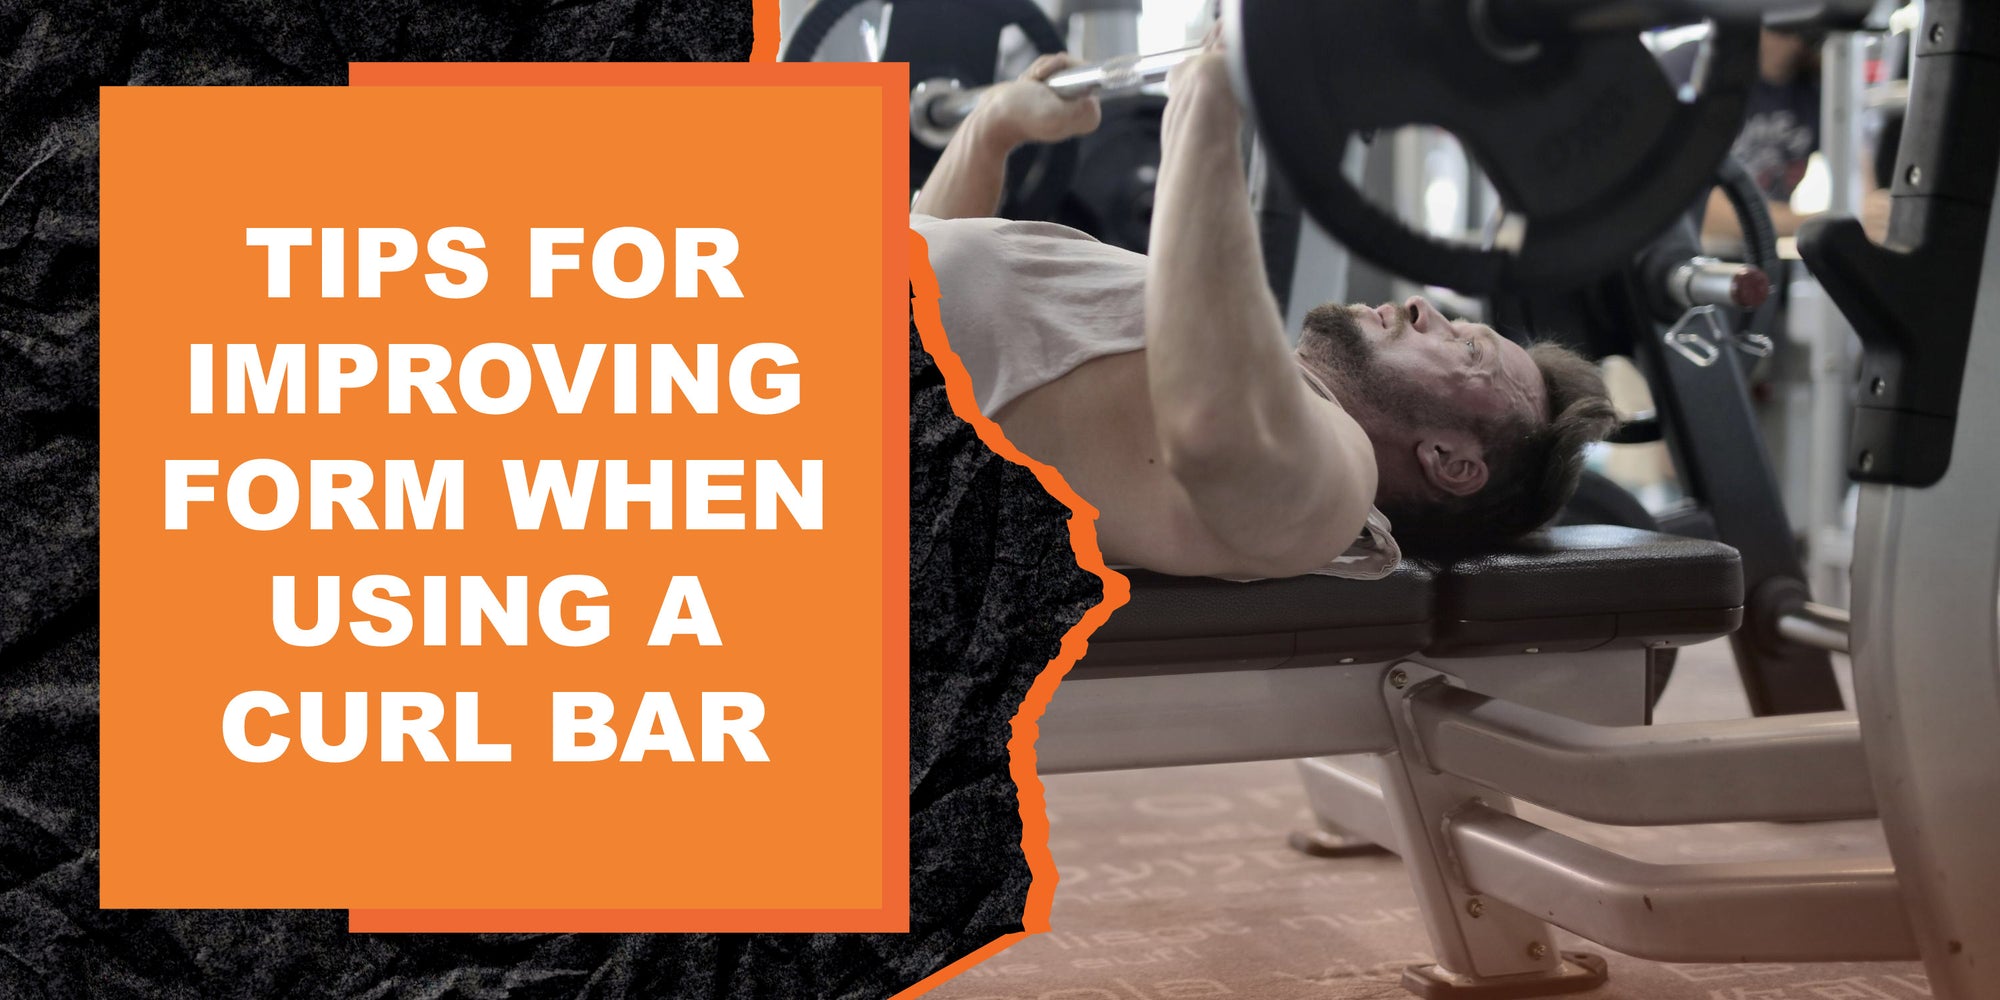 Tips for Improving Form When Using a Curl Bar